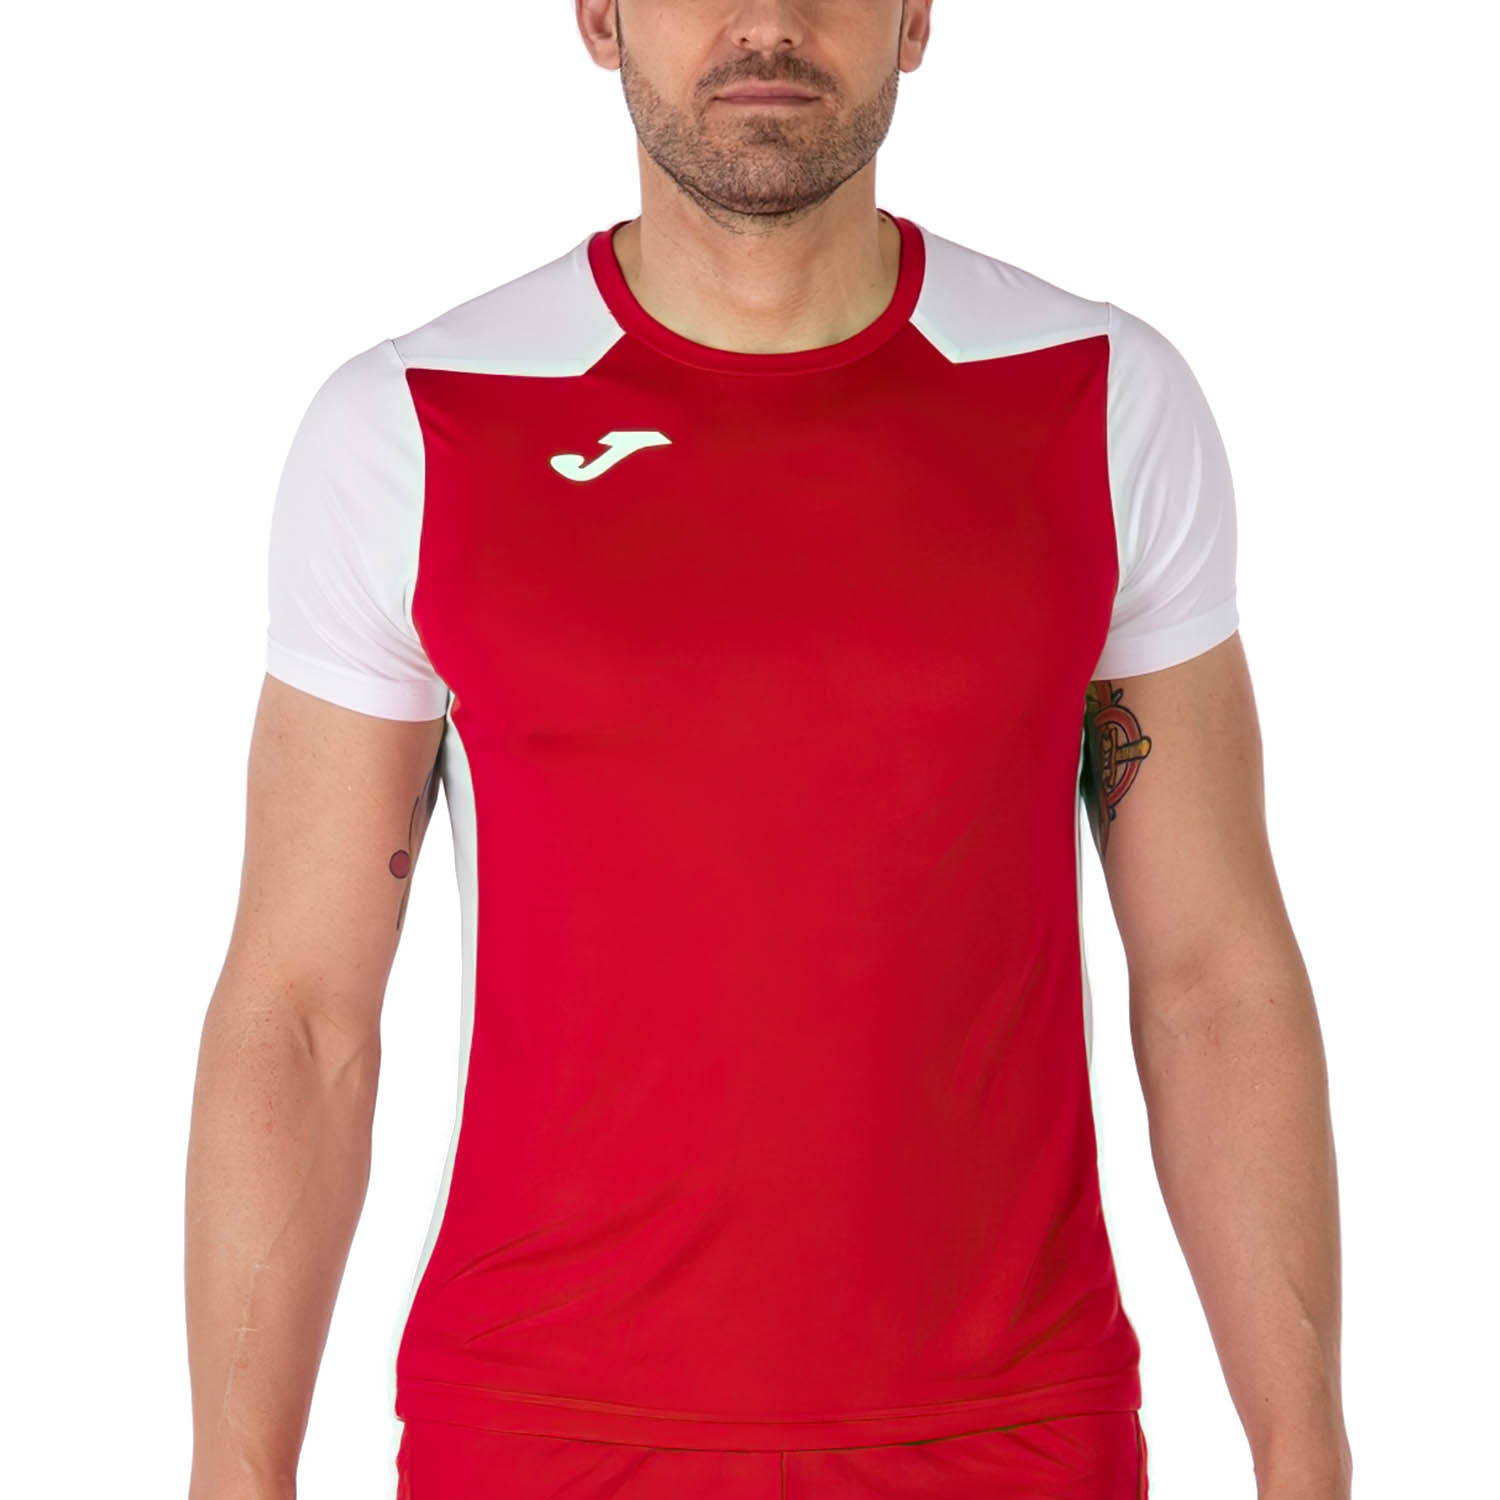 Joma Record II T-Shirt - Red/White